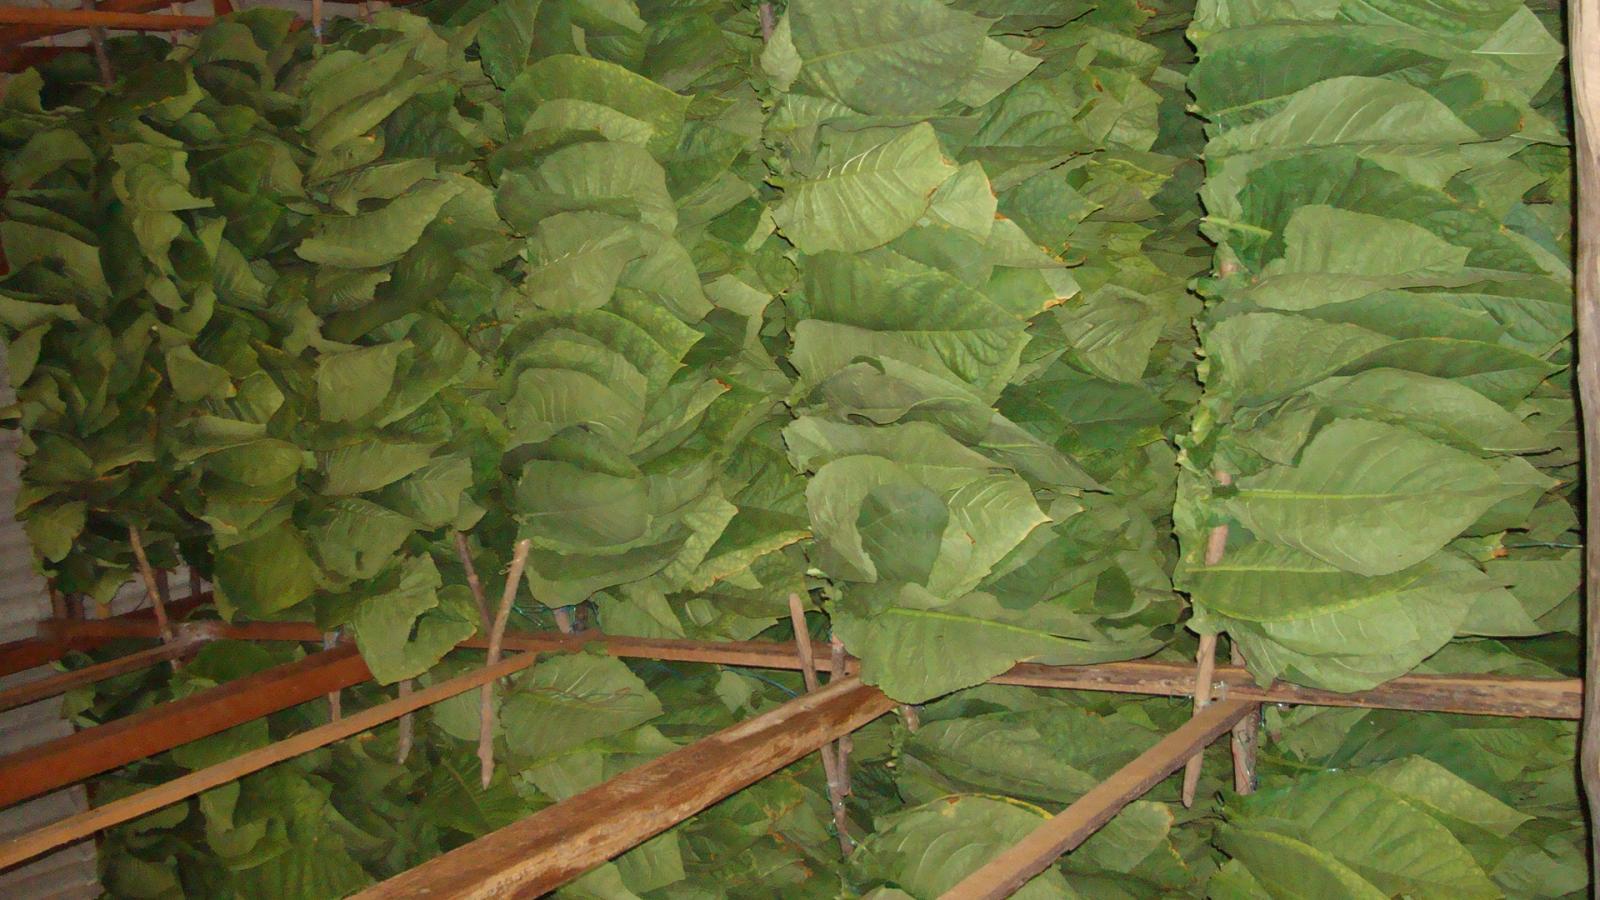 One of many barns with freshly hung tobacco leaves